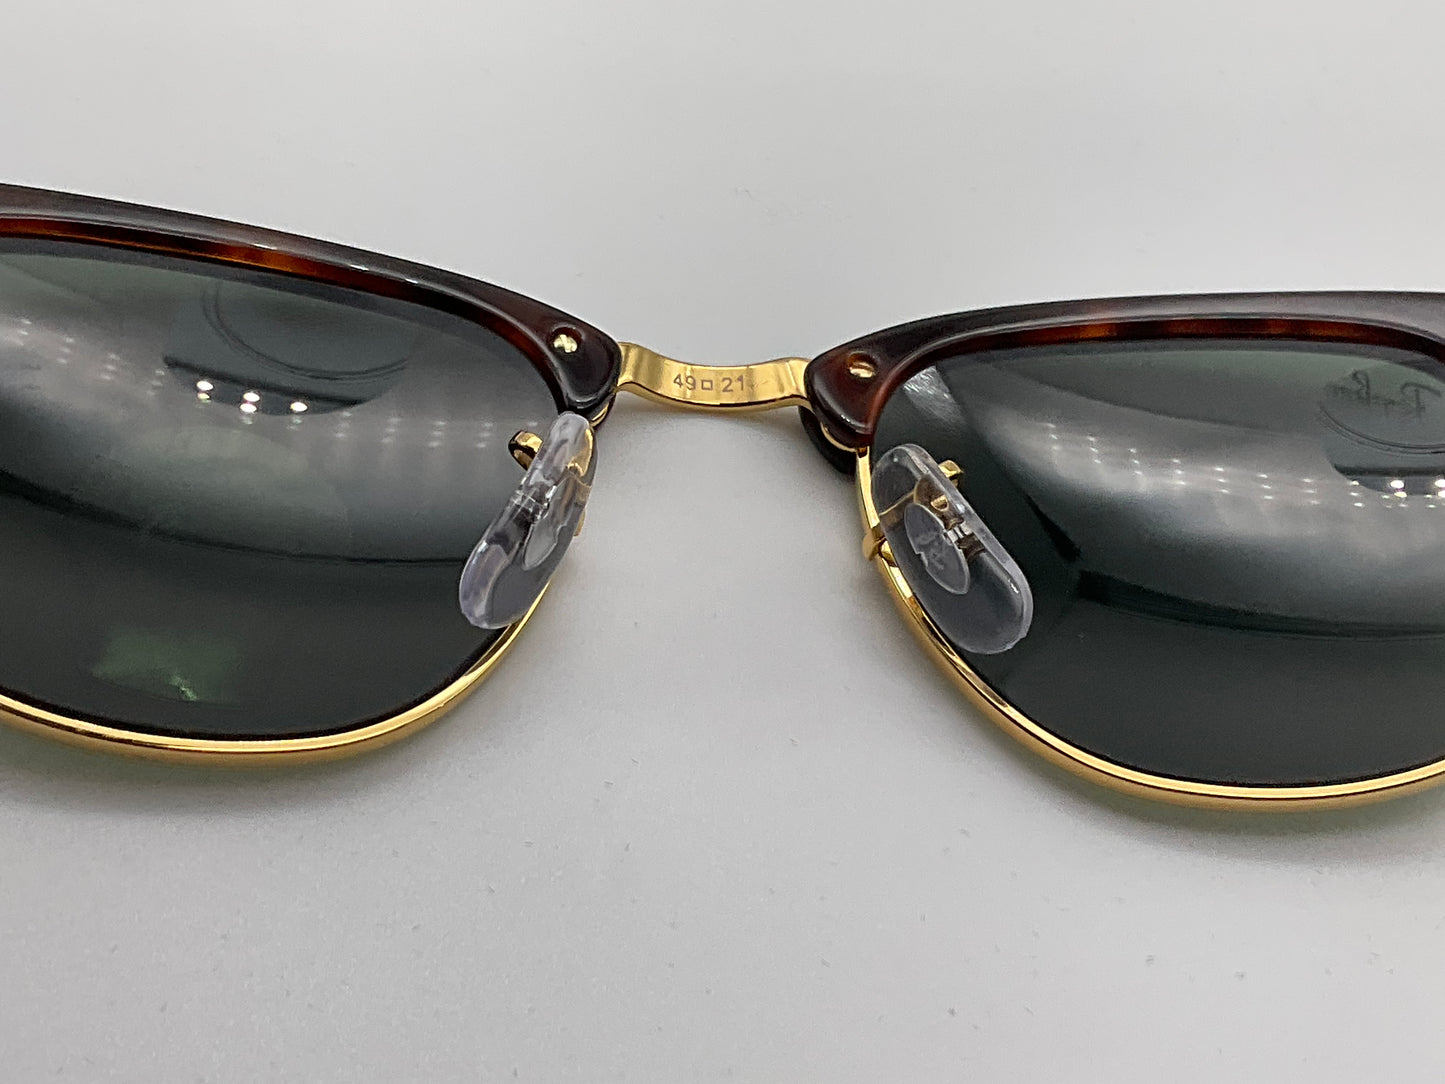 Ray Ban Clubmaster Tortoise 49 mm Sunglasses RB3016-W0366 Made in Italy